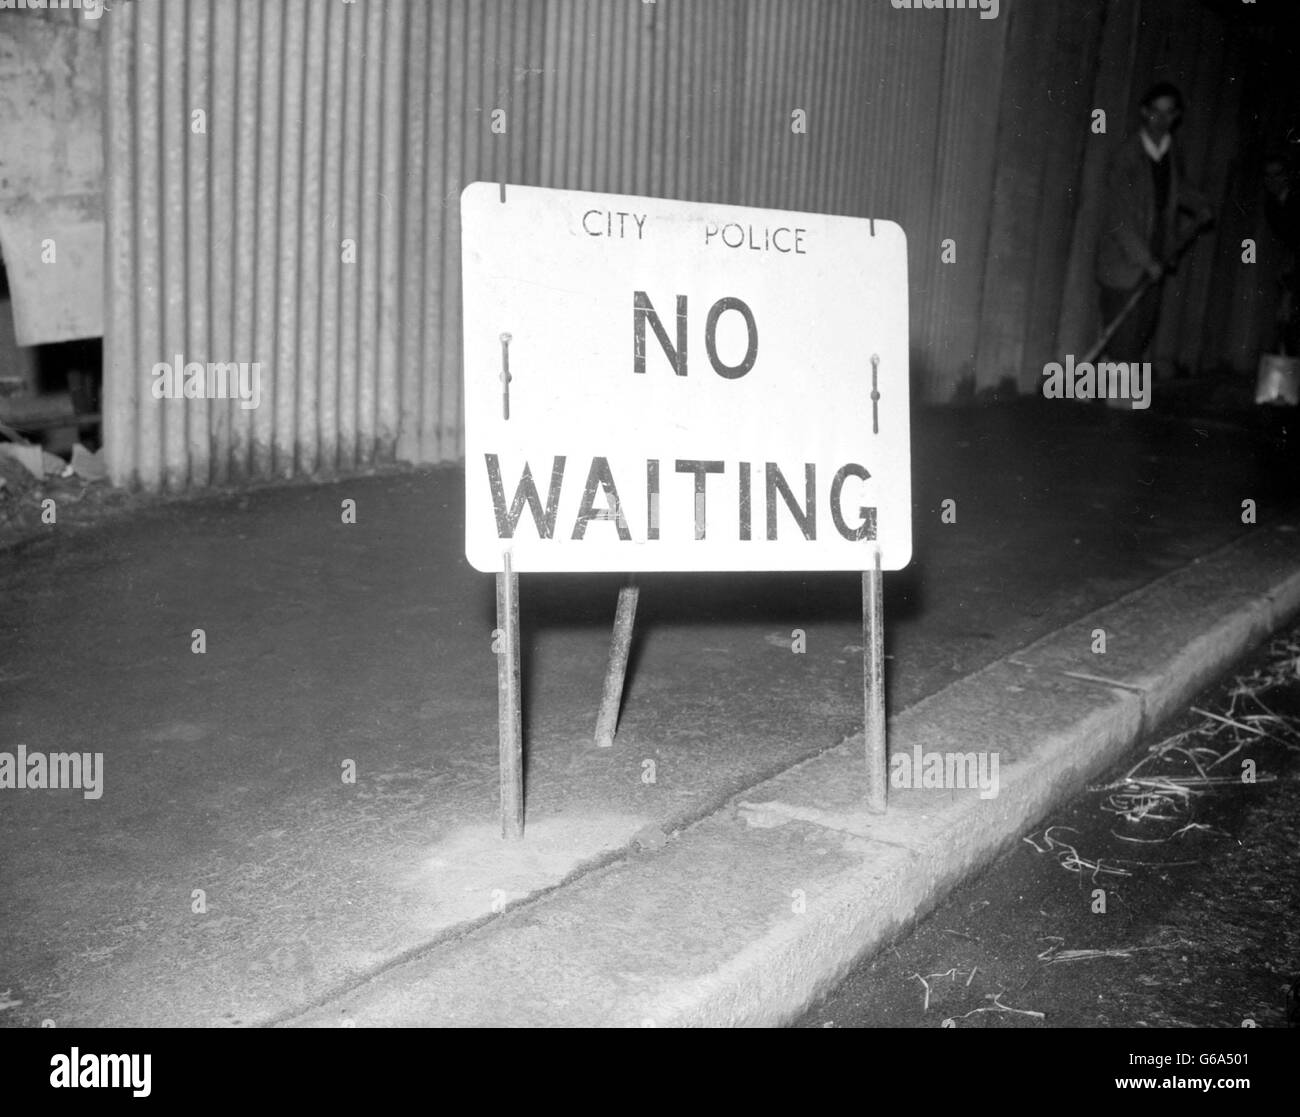 This City Police sign 'No Waiting' is one of the permanent features of the City of London, where the traffic problem is increasing steadily, through increase of cars on the road and lack of parking facilities. Stock Photo